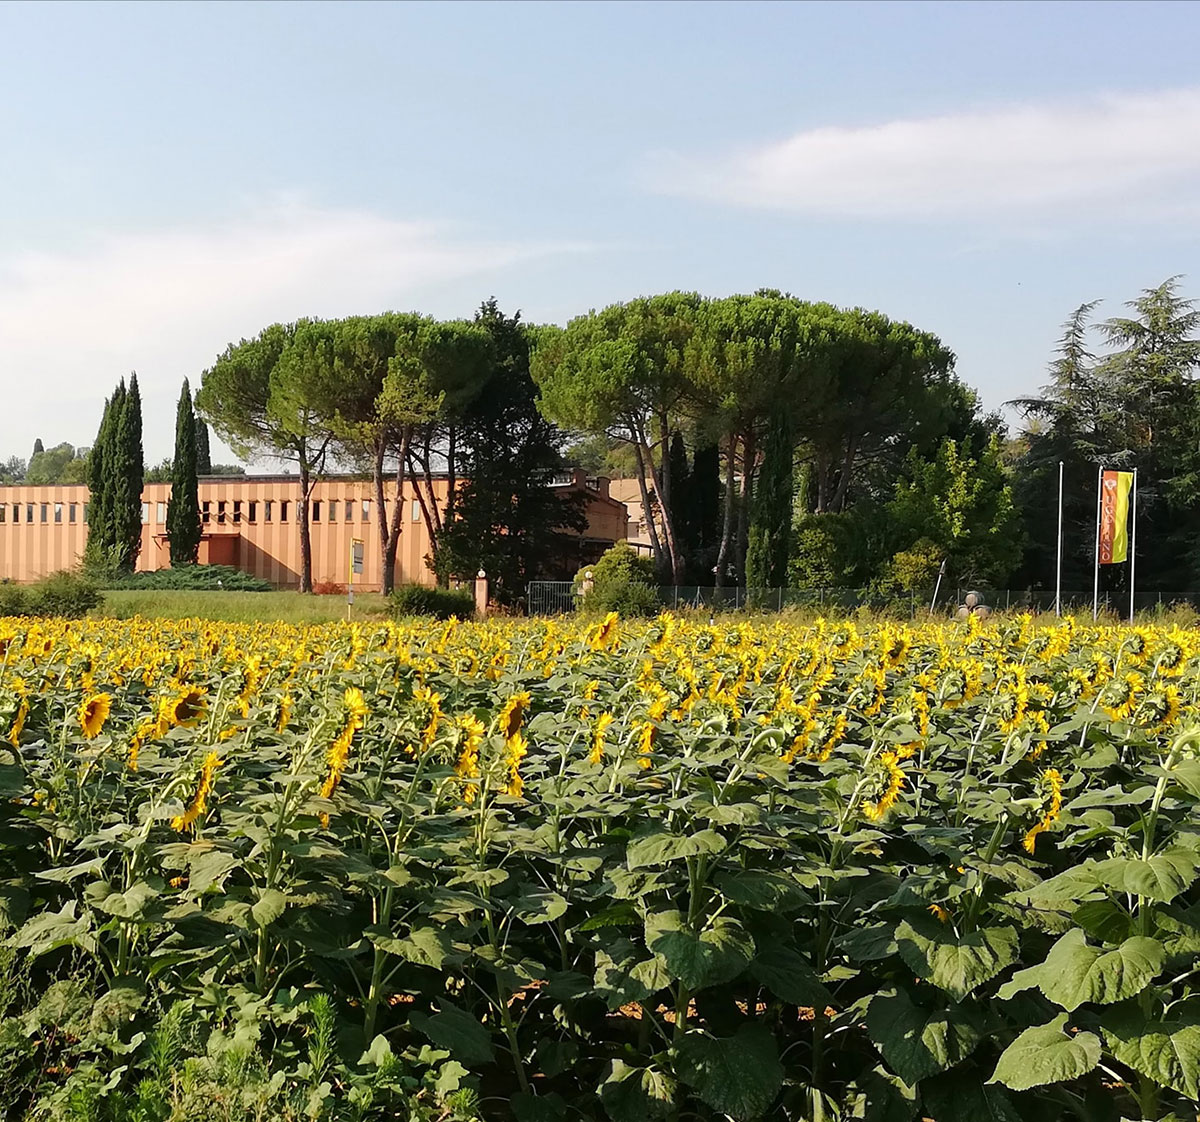 Sunflower field outside the winery of Azienda Uggiano in Tuscany, Italy.